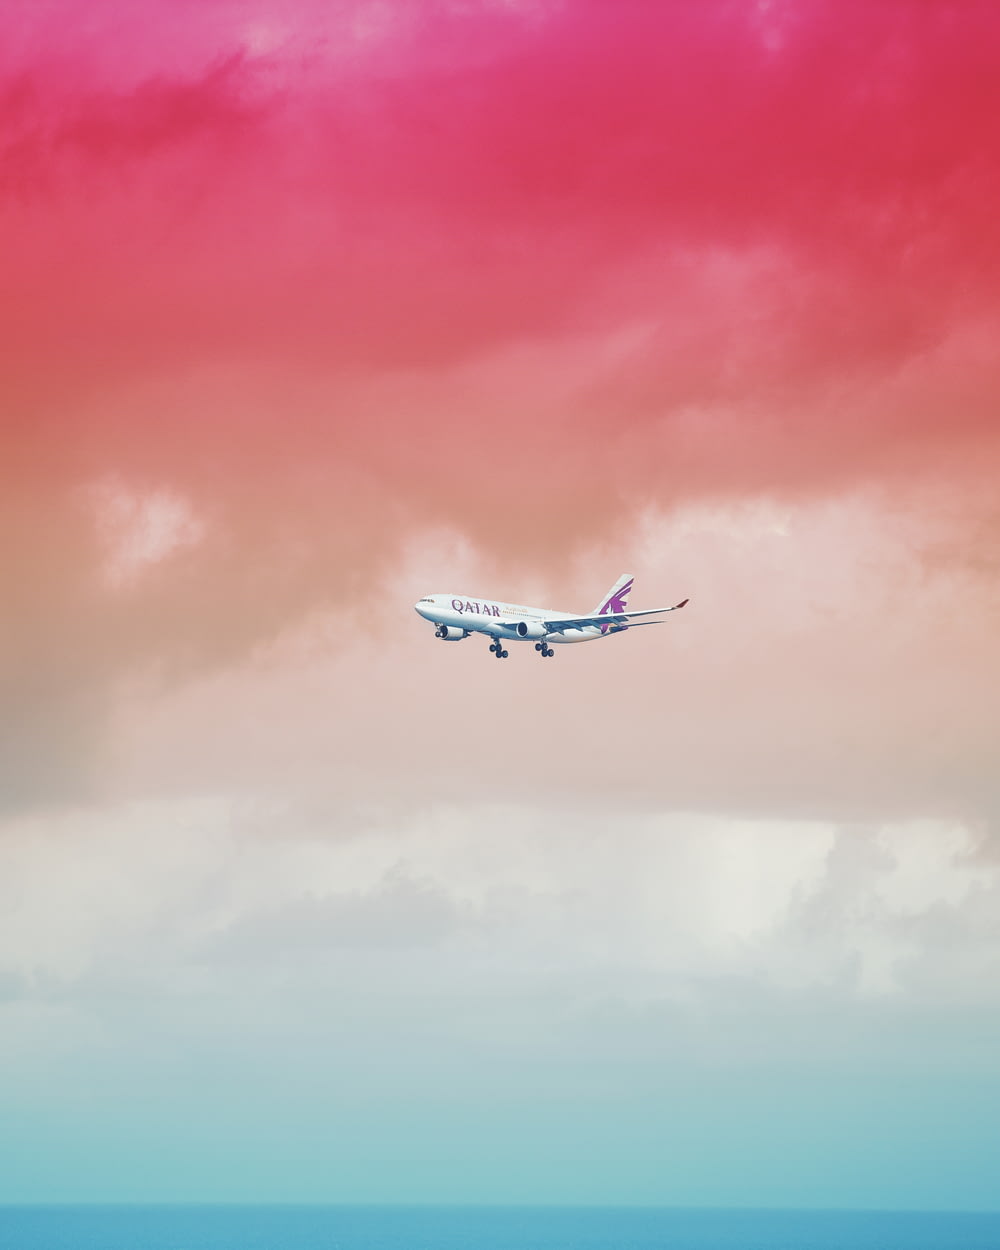 Qatar Airlines airplane flying under red cloud formation